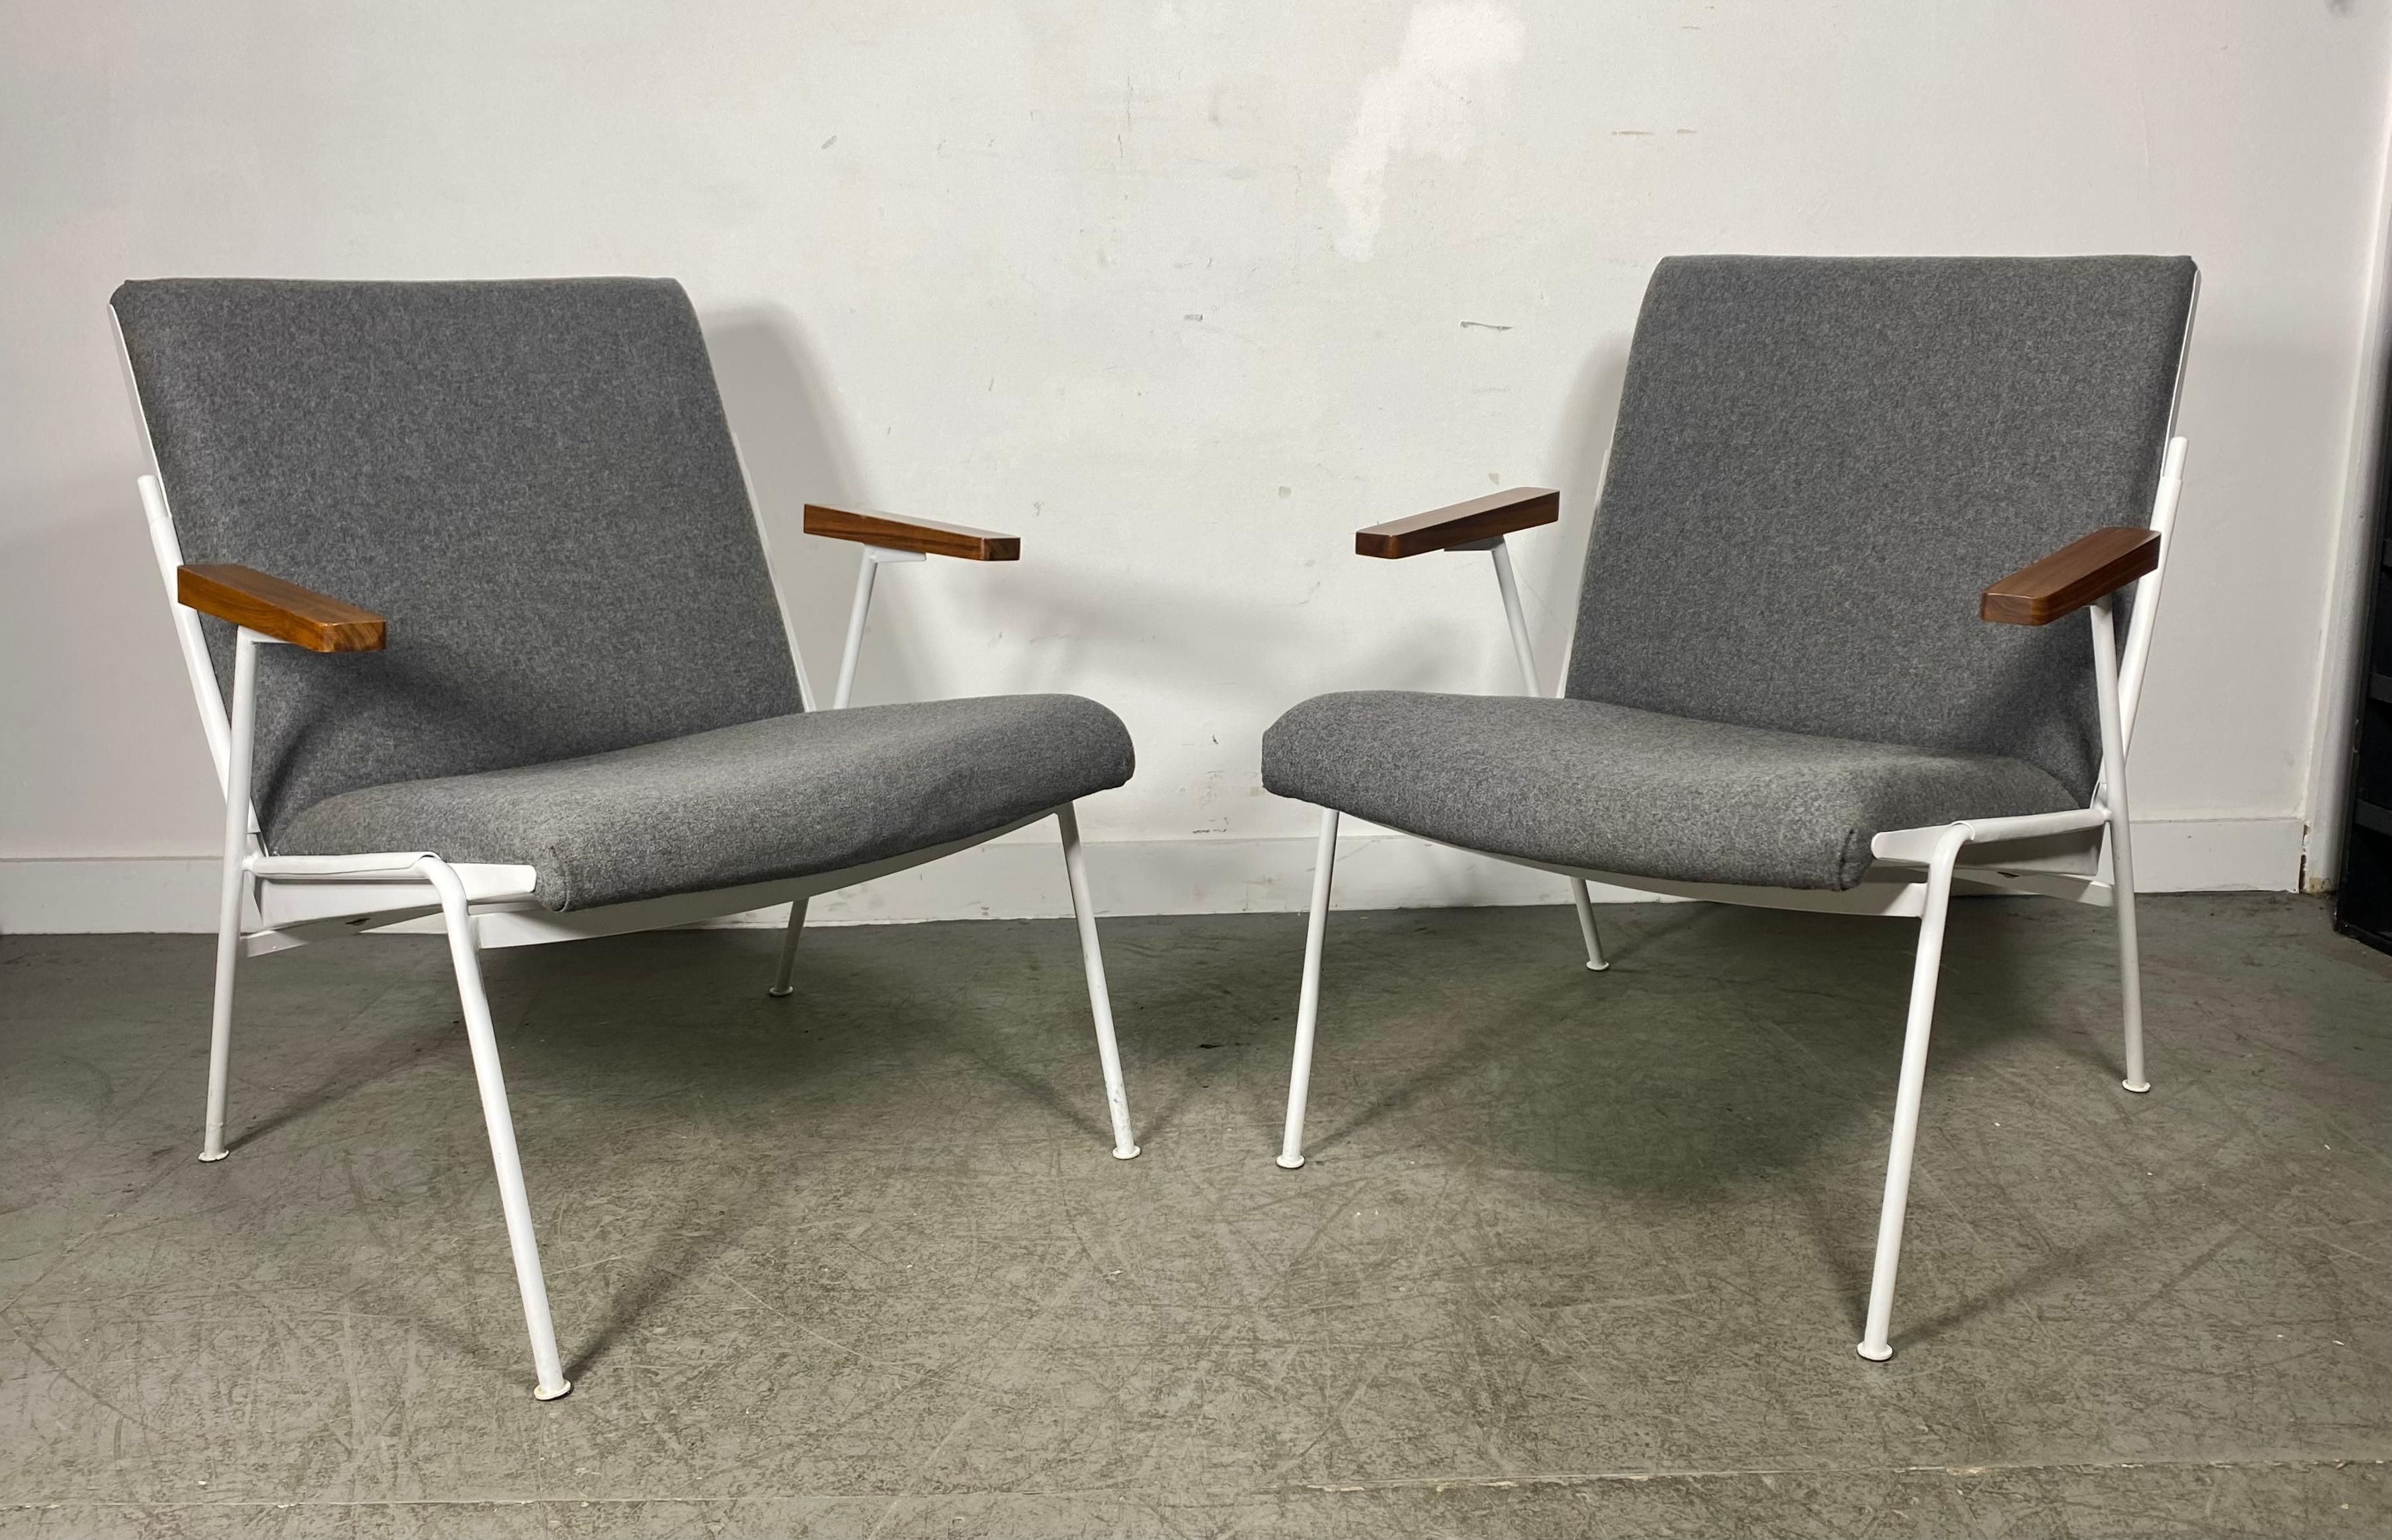 Pair 1959, Wim Rietveld for Ahrend de Cirkel, Oase Chairs, , classic modernist In Good Condition For Sale In Buffalo, NY